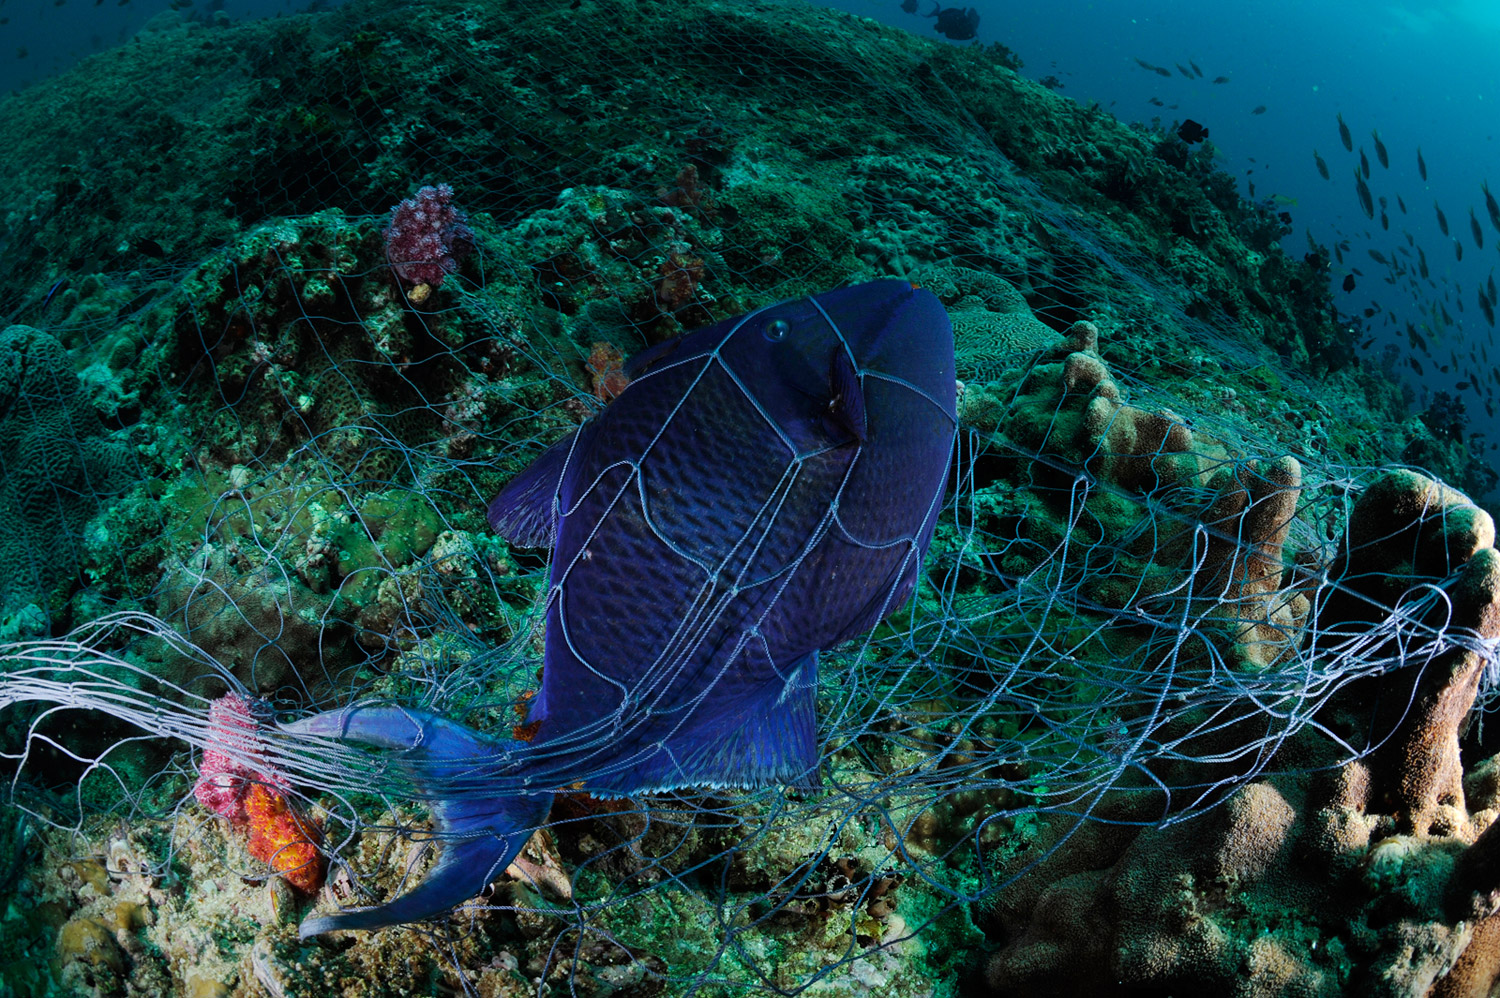 A trigger fish entangled in an abandoned gill net on a coral reef in the Damaniyat Islands Marin Reserve, Oman. Otherwise doomed to die, I cut the fish free with my dive knife after taking a few photographs.